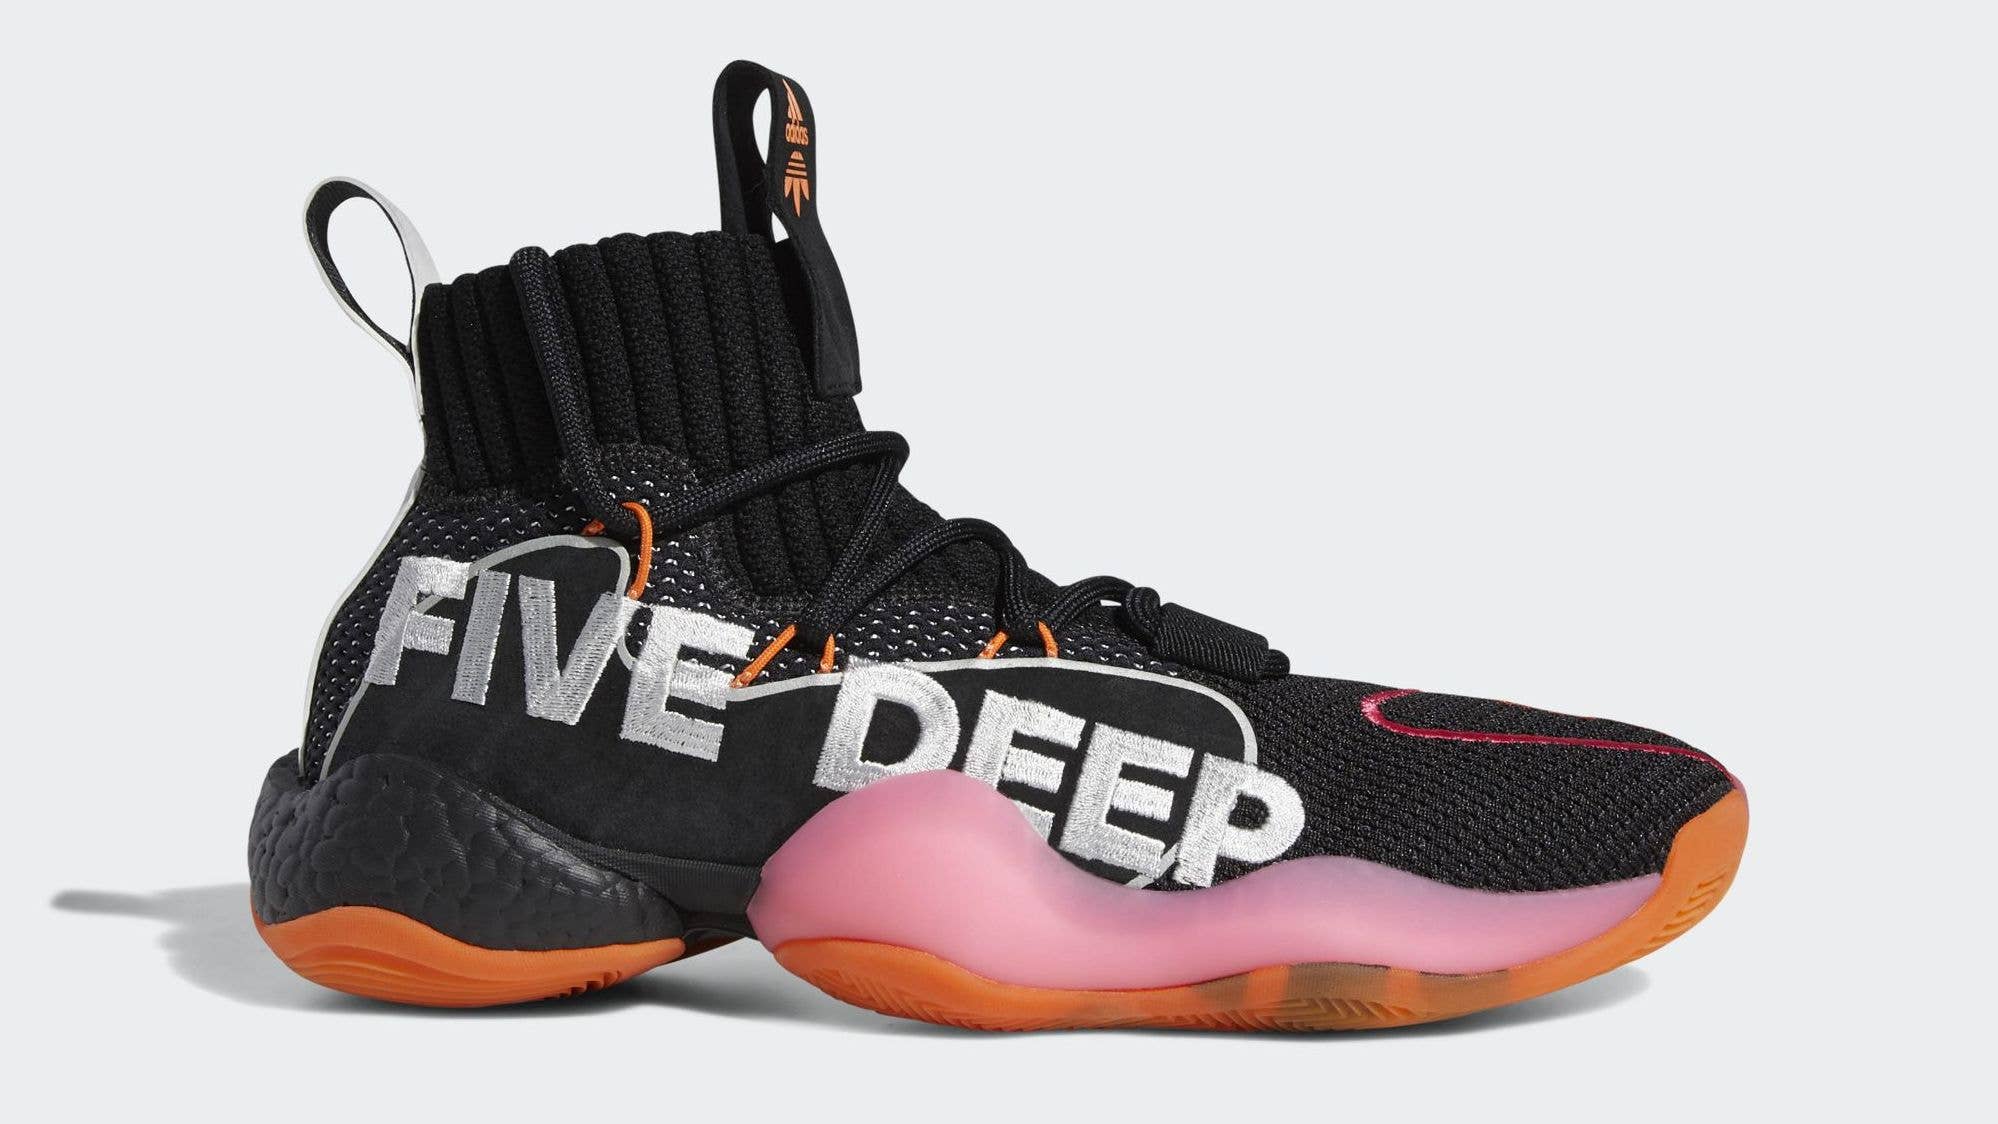 Get Ready For The Pharrell x adidas Crazy BYW LVL X White